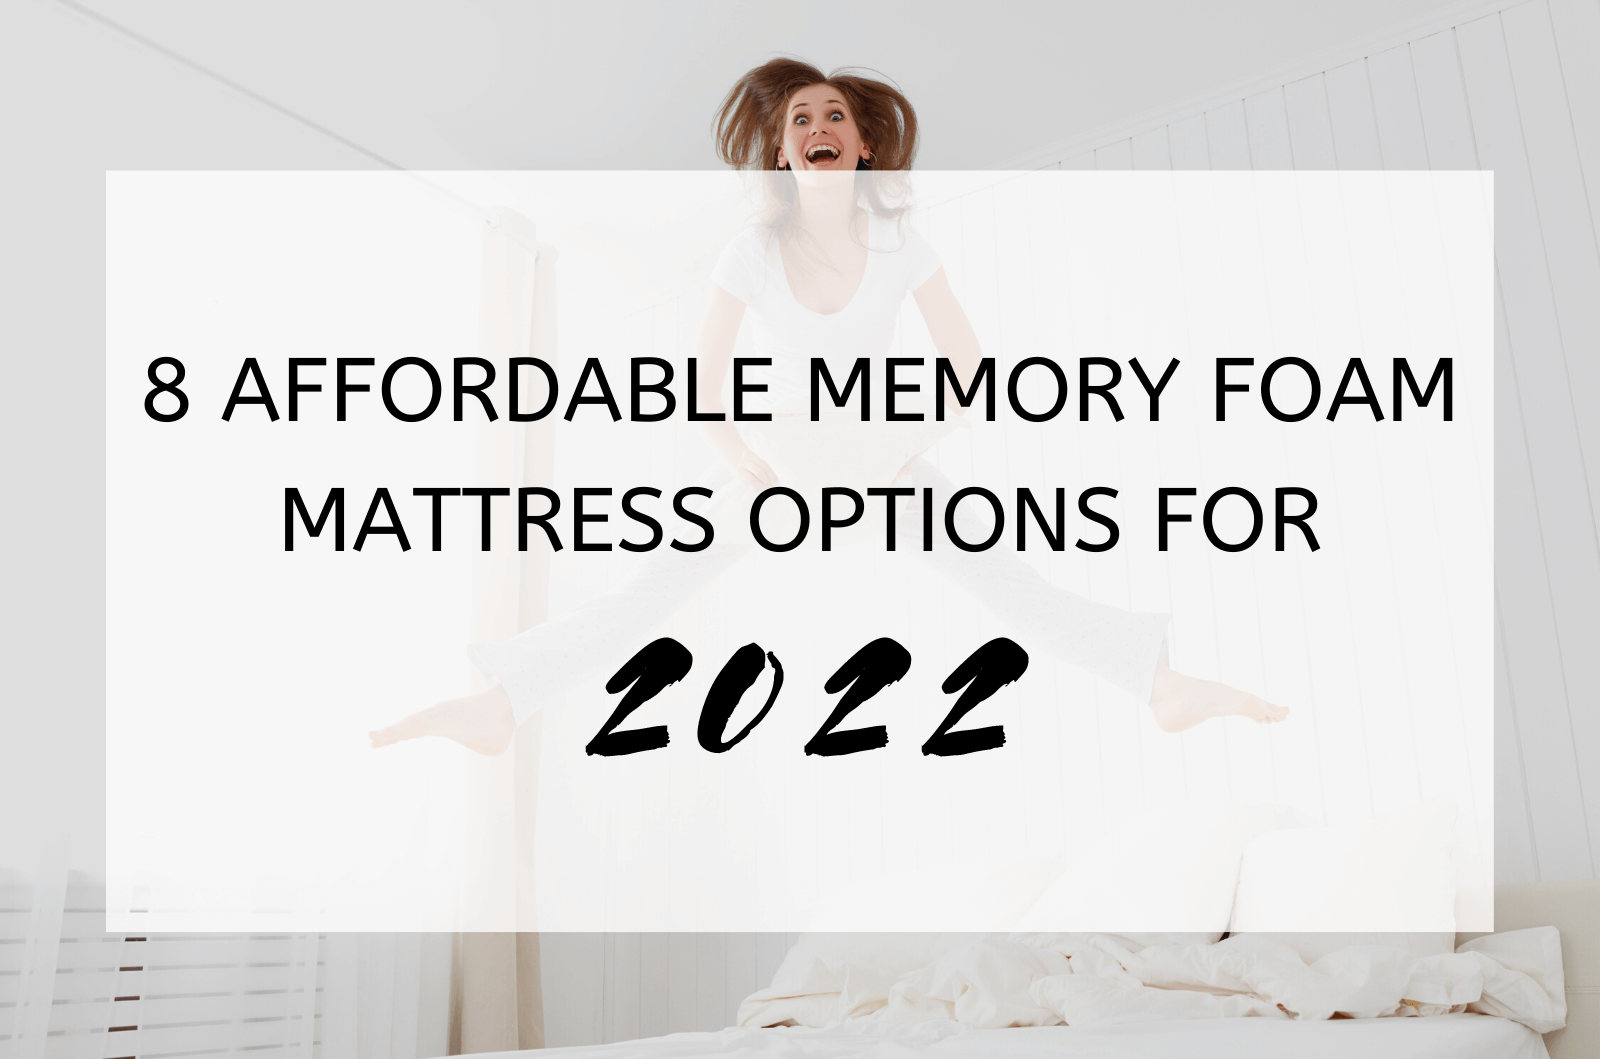 8 Affordable Memory Foam Mattress Options For 2022